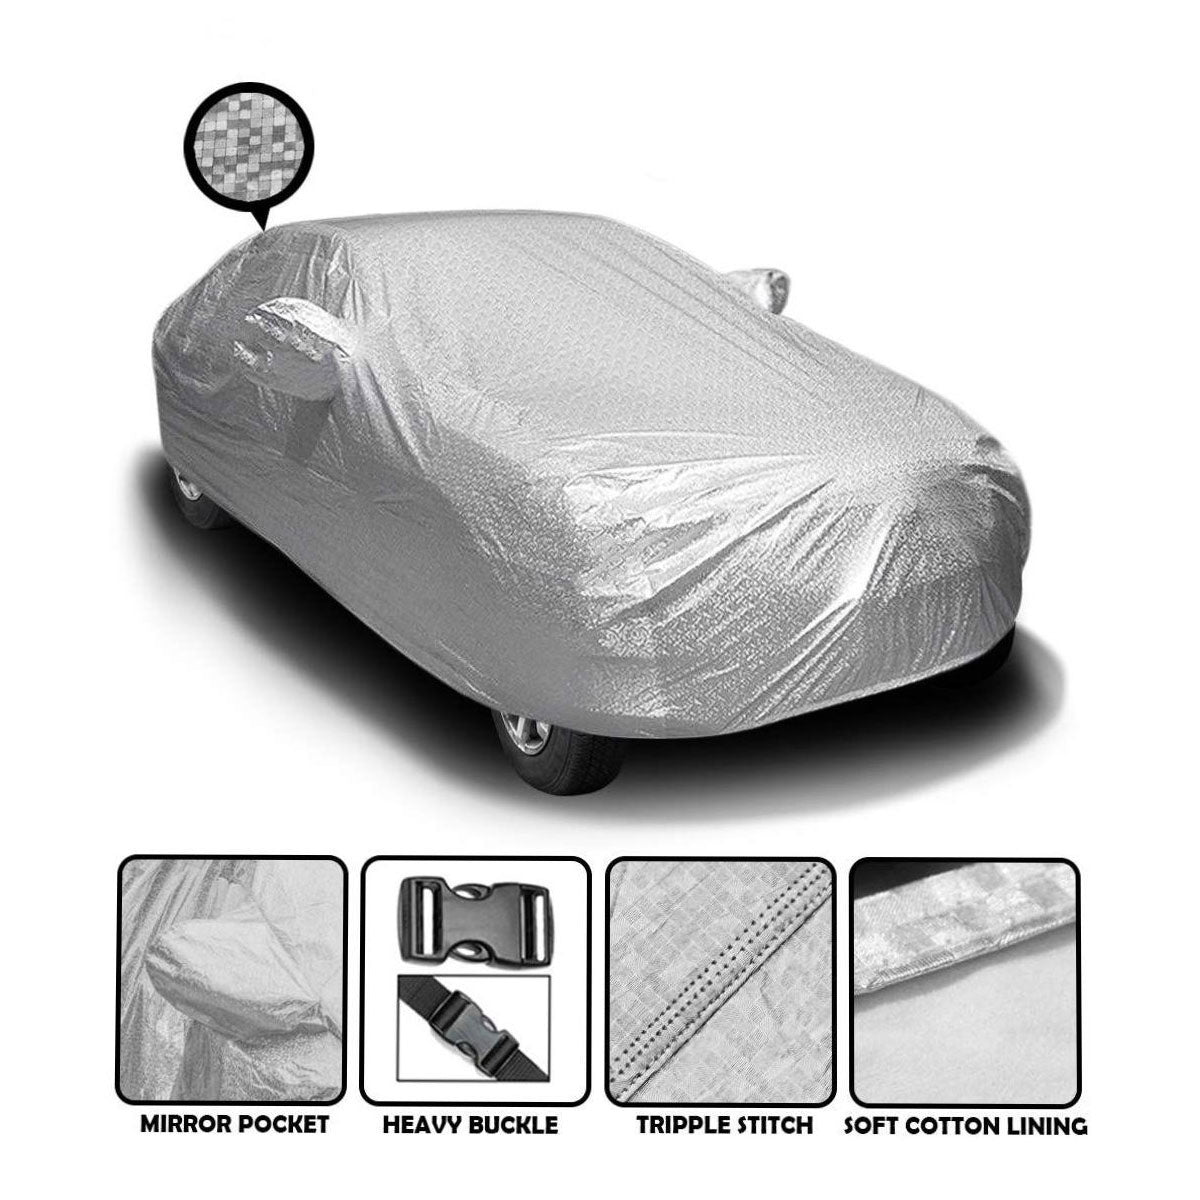 Oshotto Spyro Silver Anti Reflective, dustproof and Water Proof Car Body Cover with Mirror Pockets For Skoda Superb